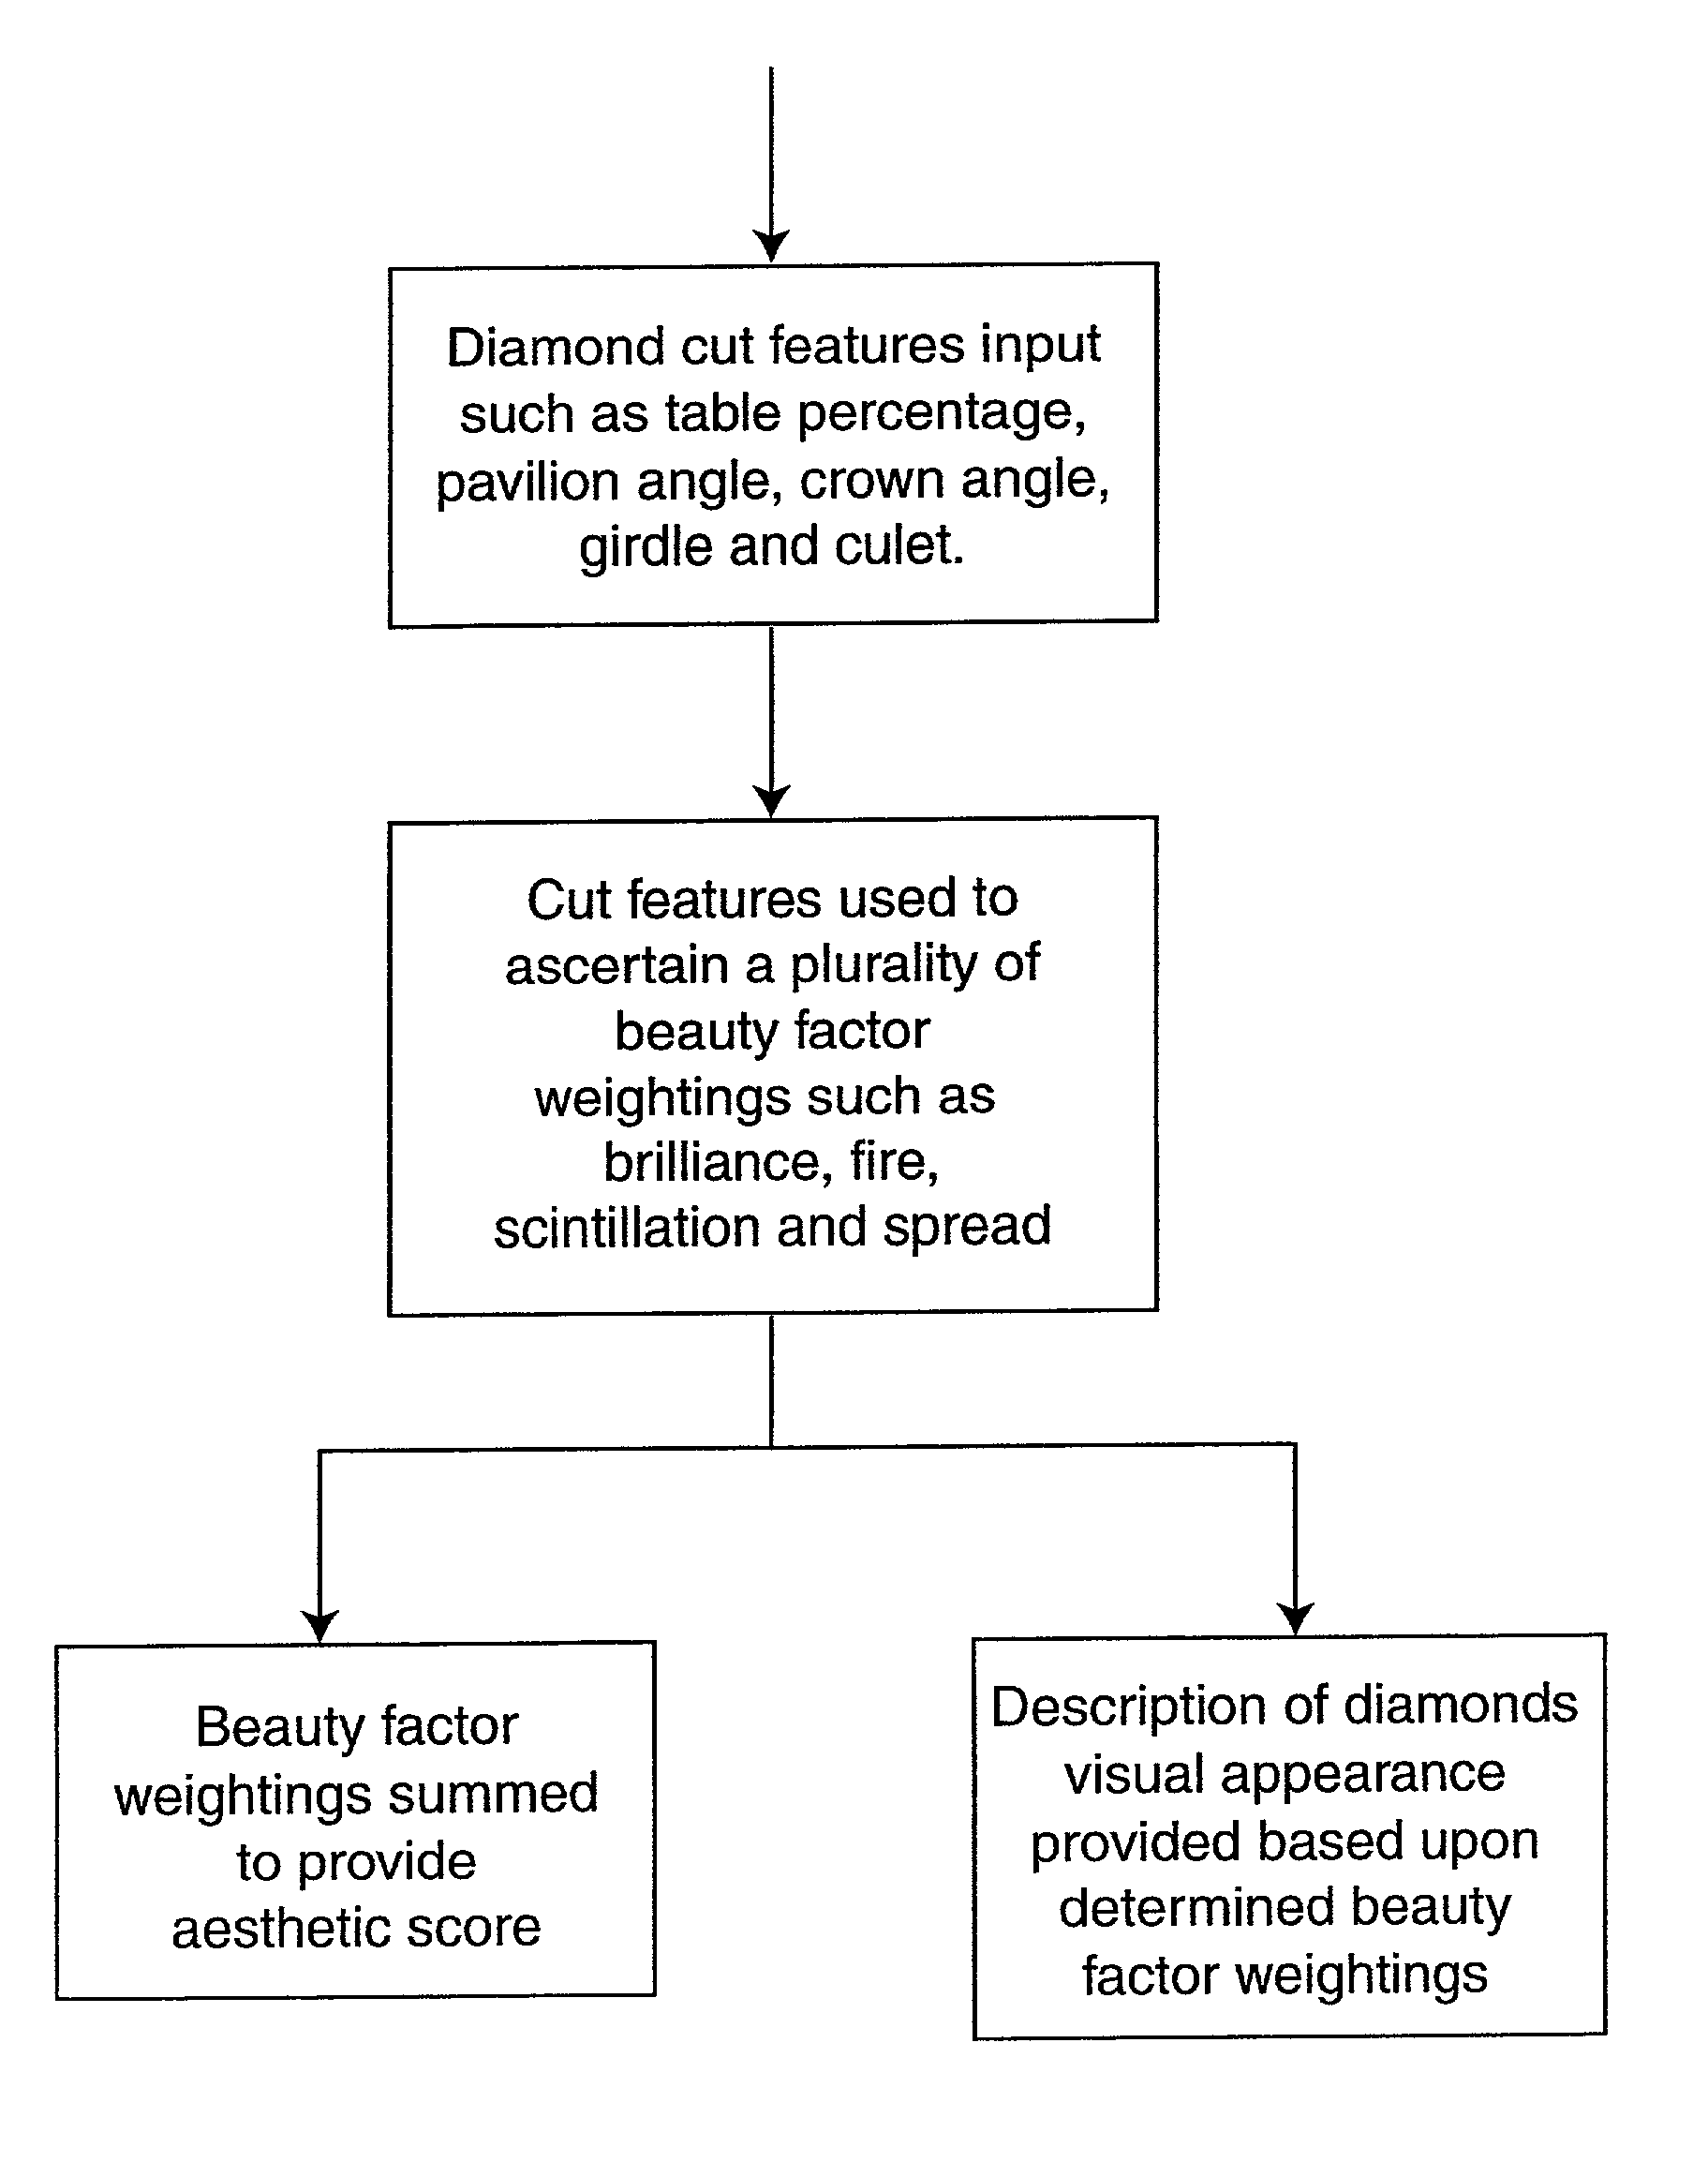 Computer implemented method, computer program product, and system for gem evaluation